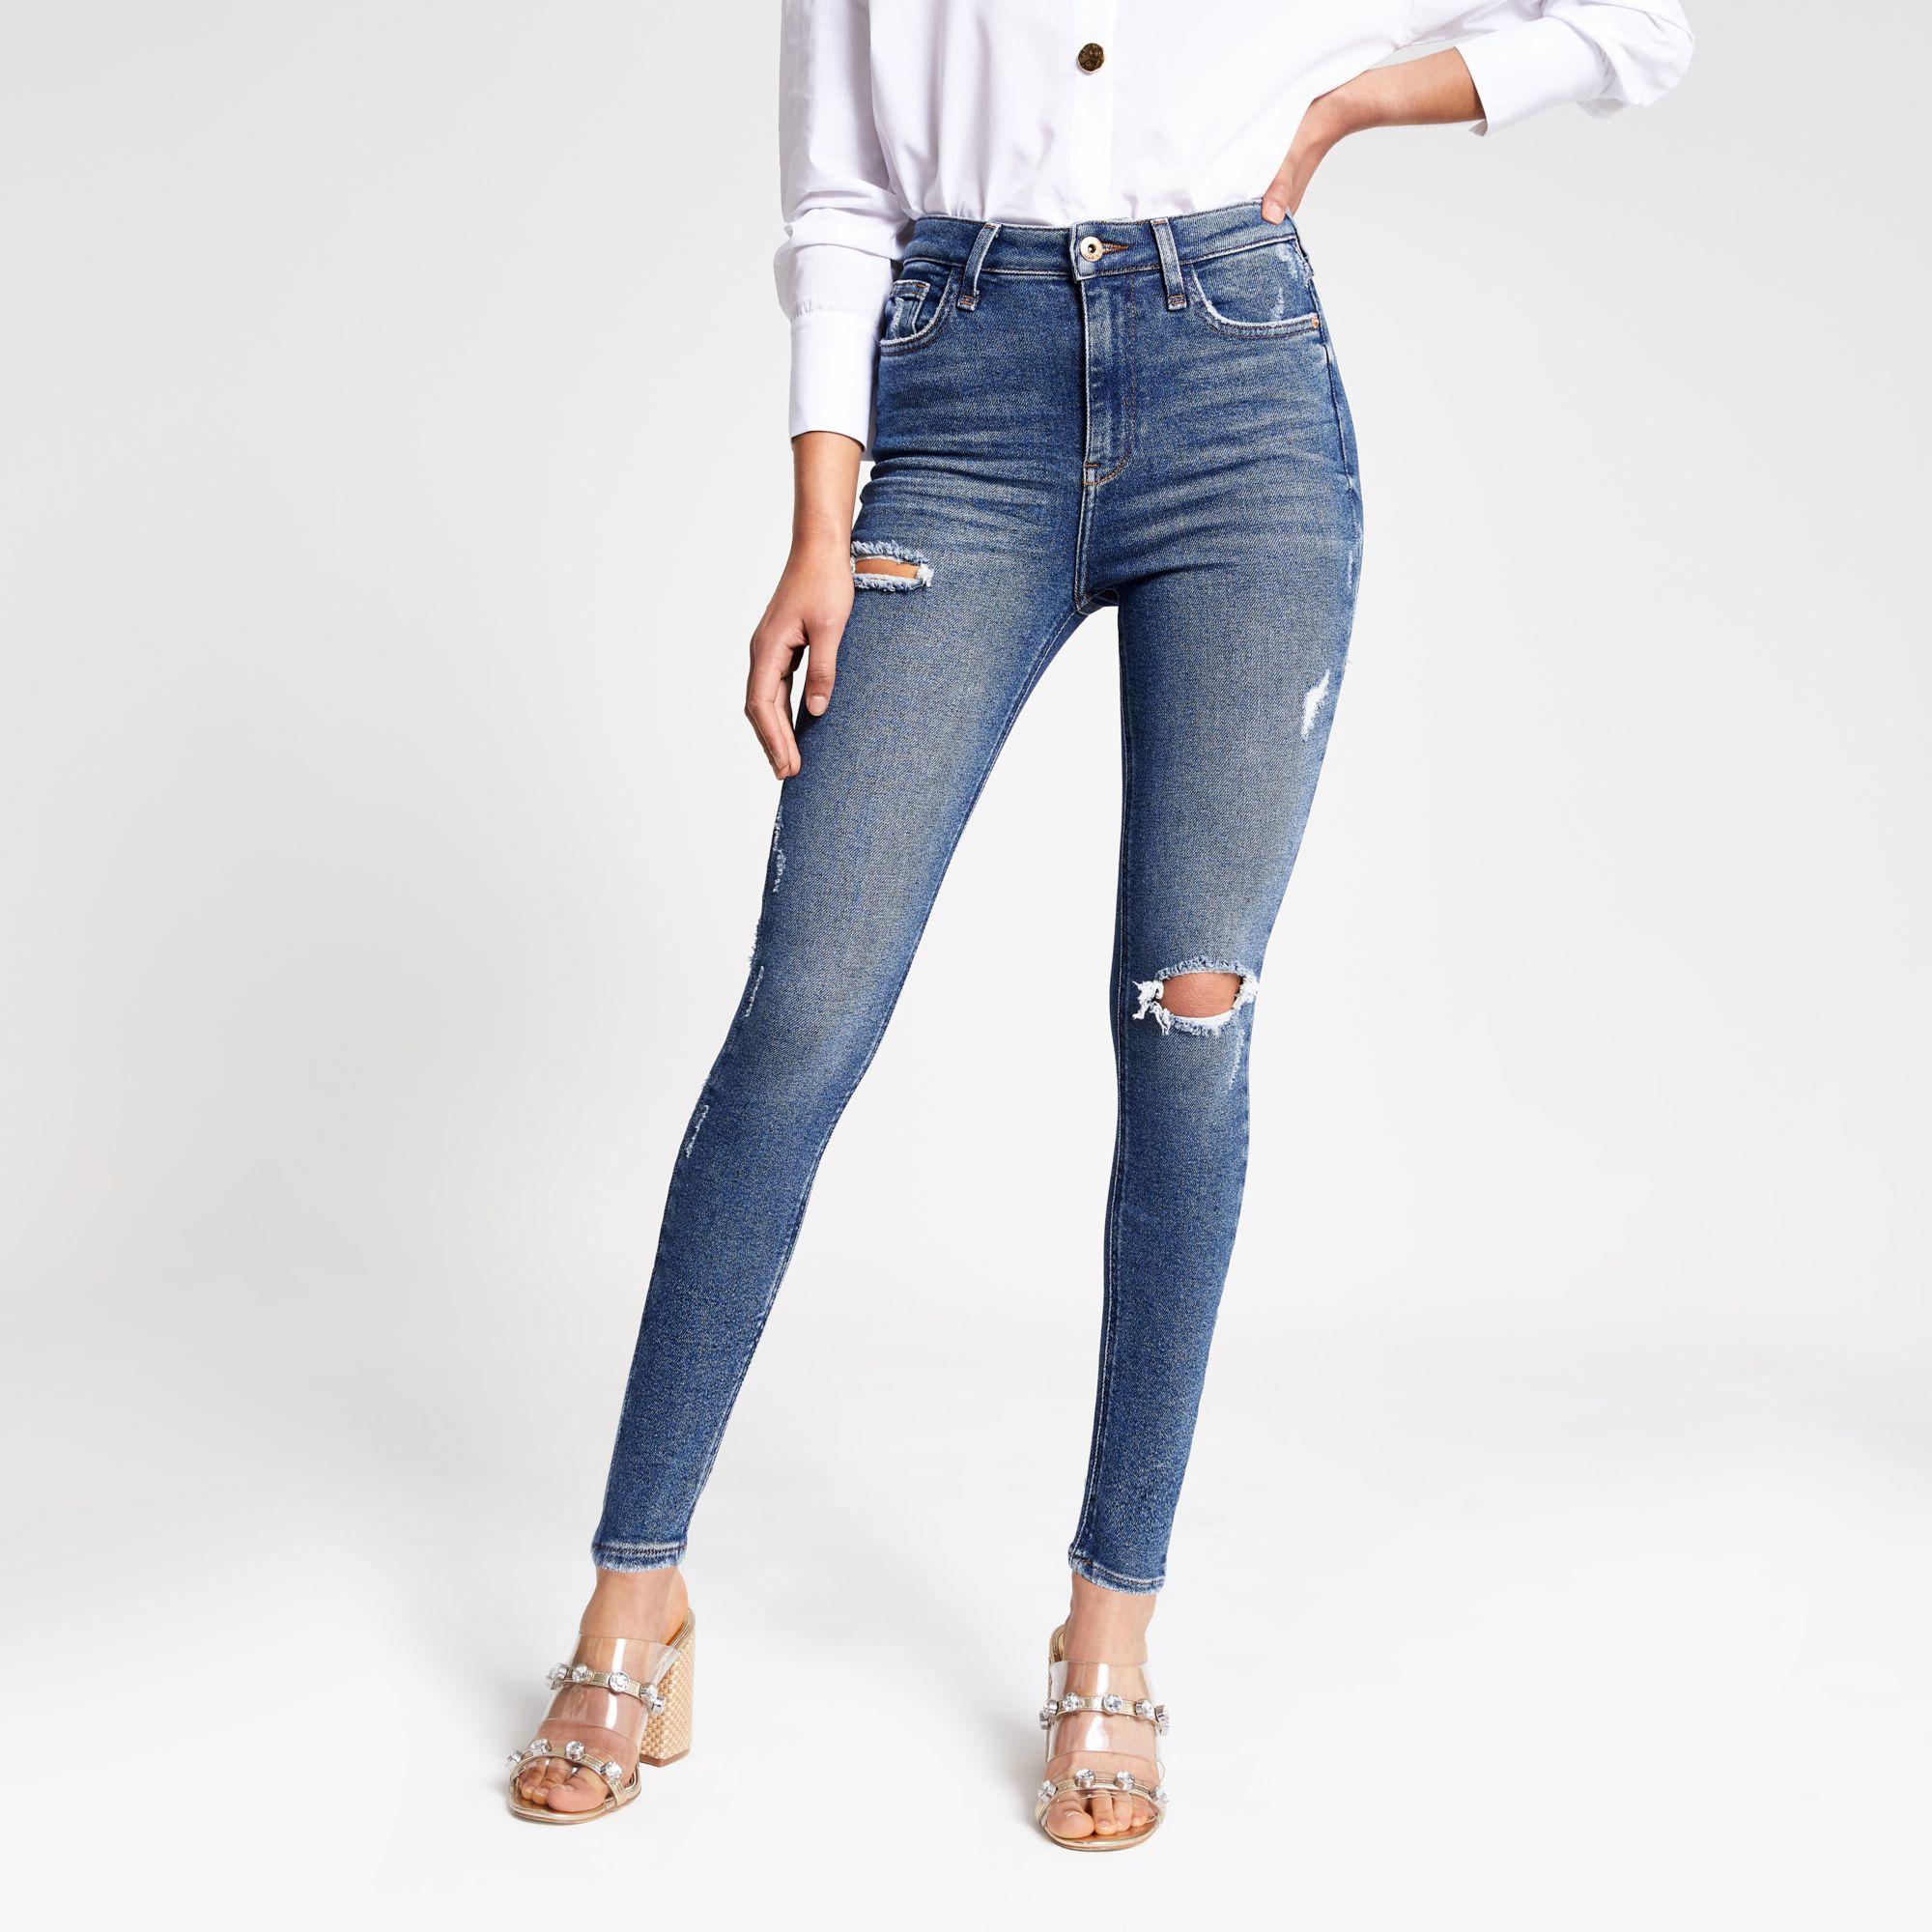 River Island Authentic Denim Hailey High Rise Ripped Jeans in Blue - Lyst